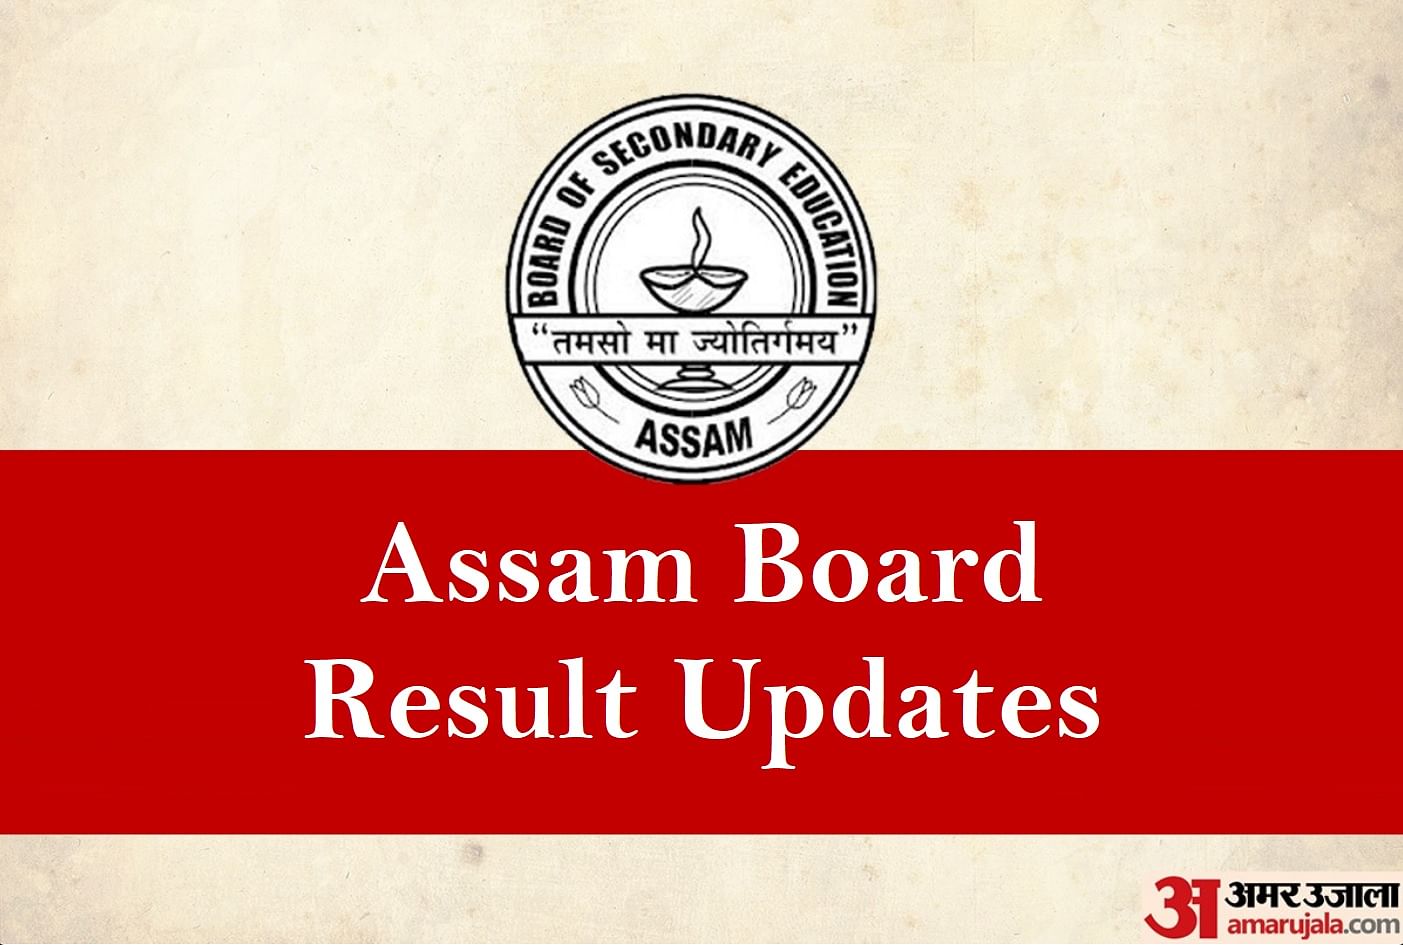 Assam HSLC results 2022: Class 10 Results Declared, Check Scorecard and Pass Percentage Here